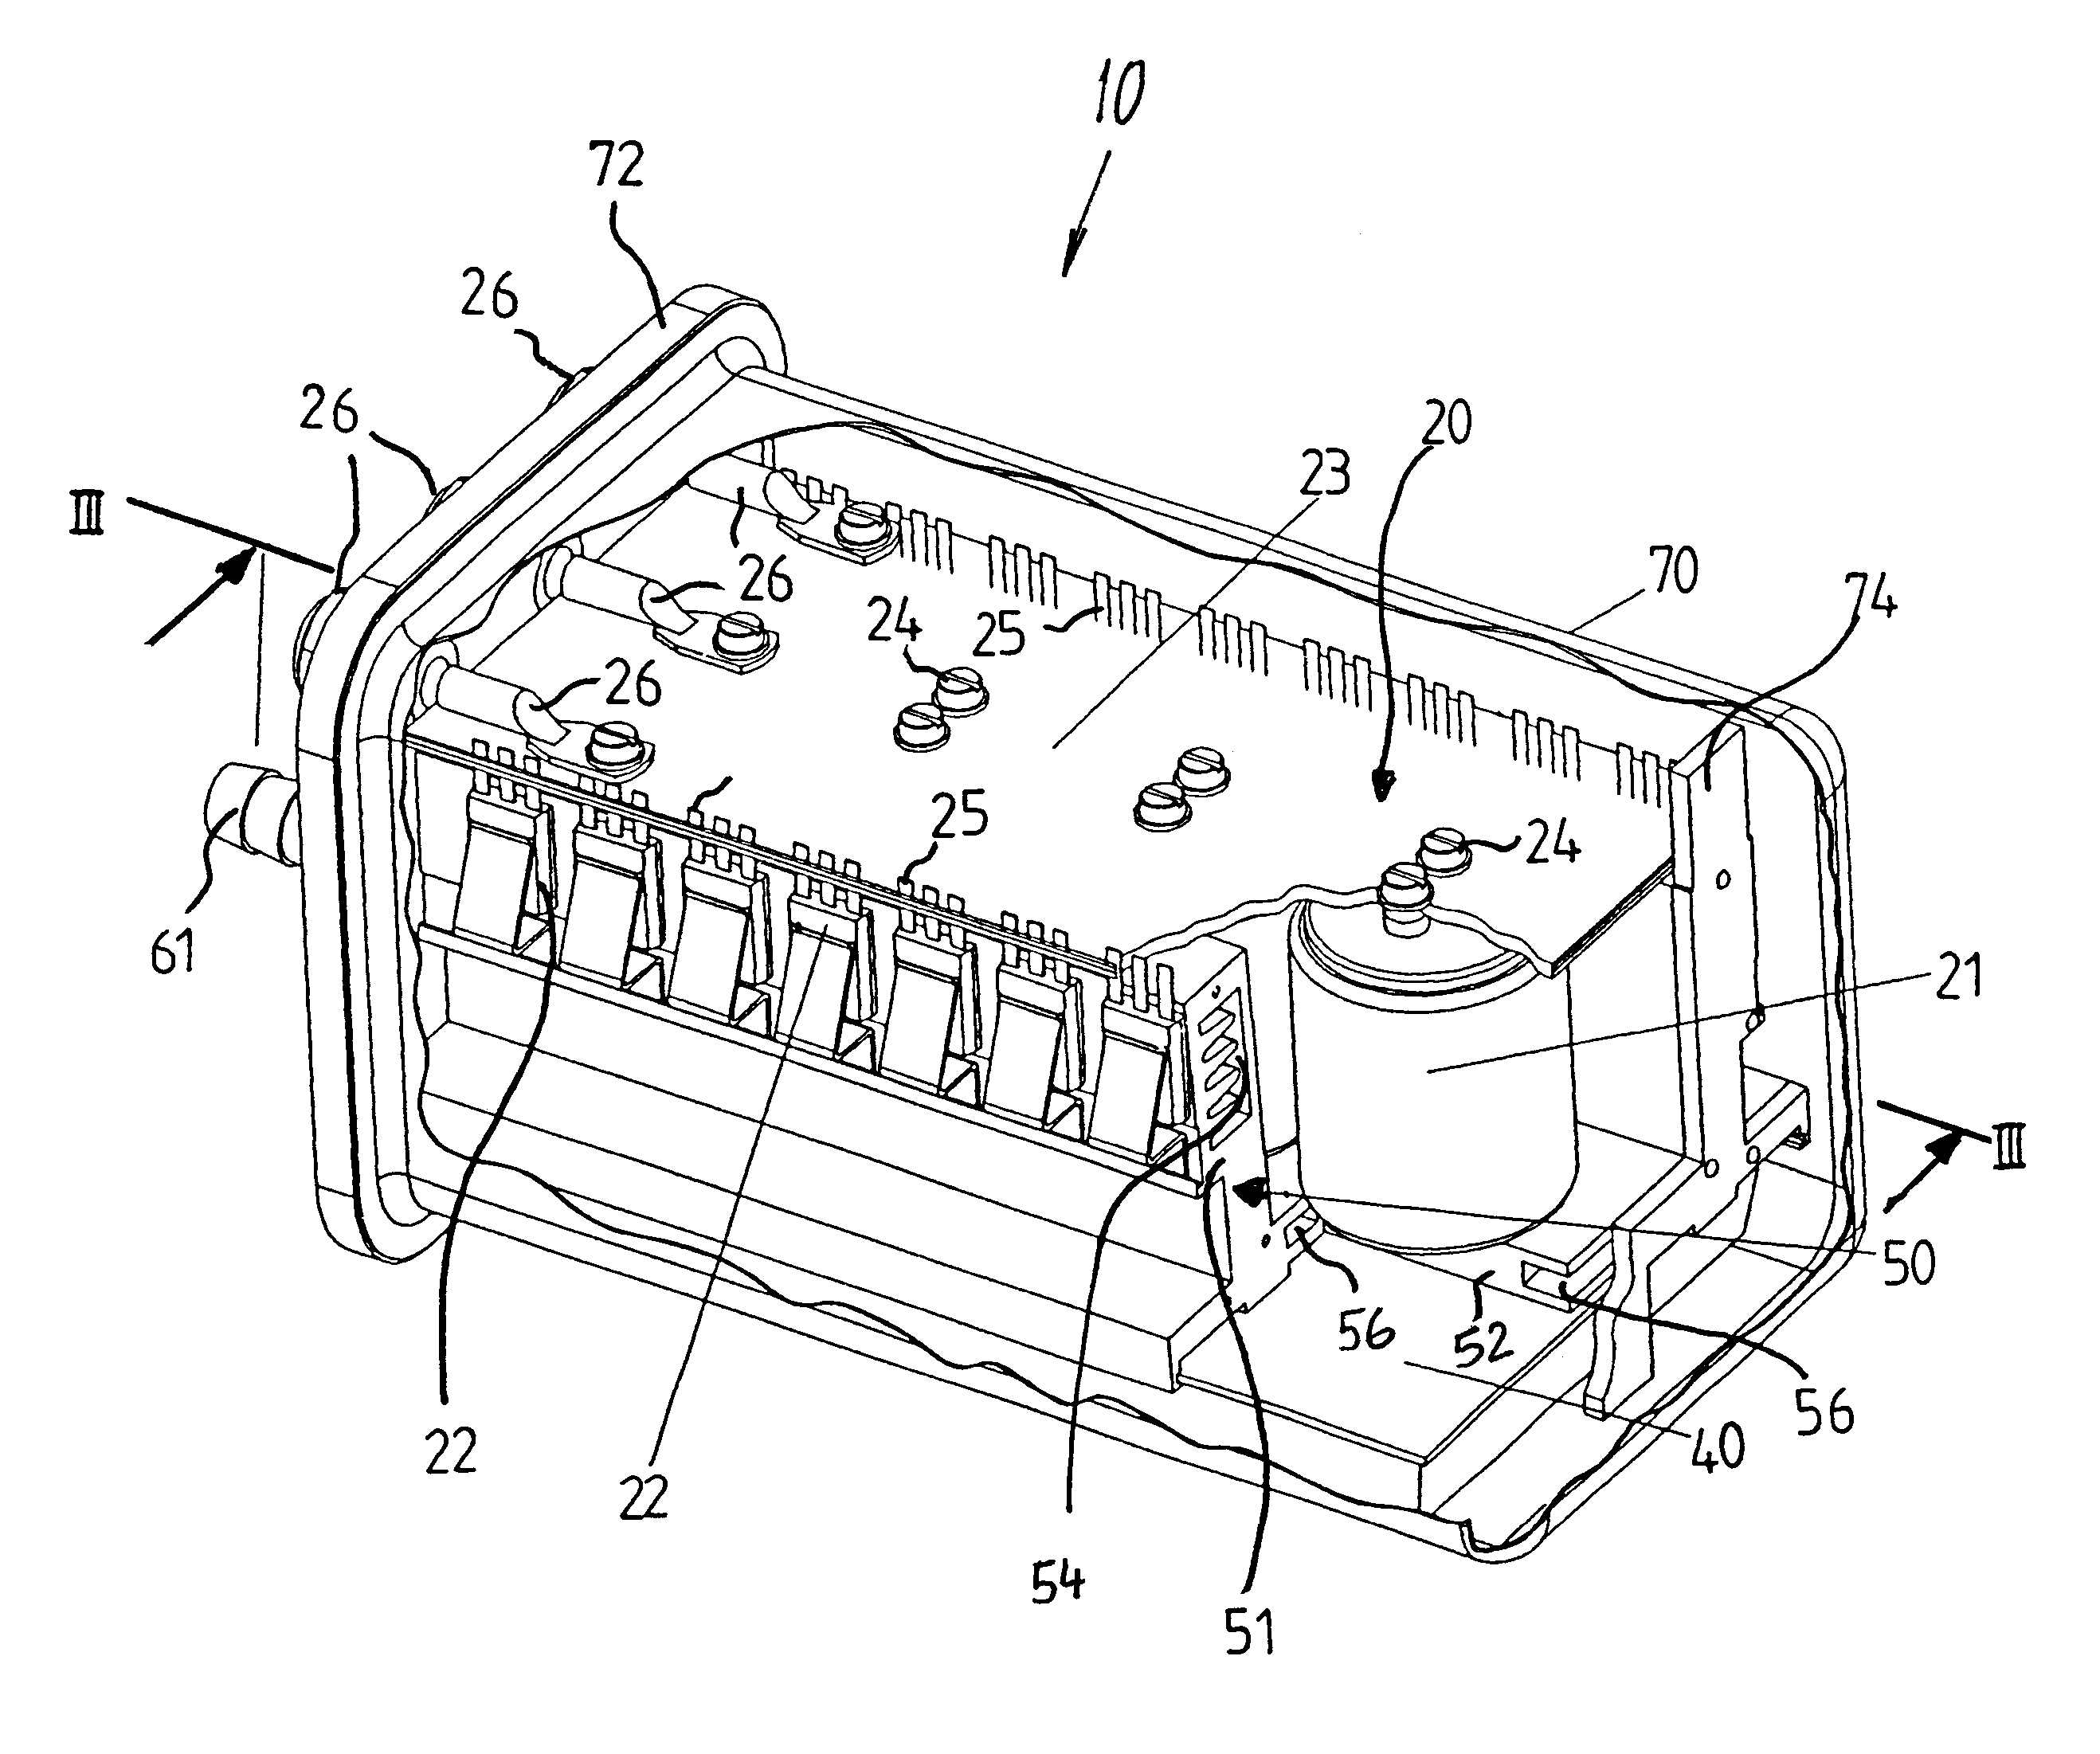 Power electronics device for controlling an electric machine